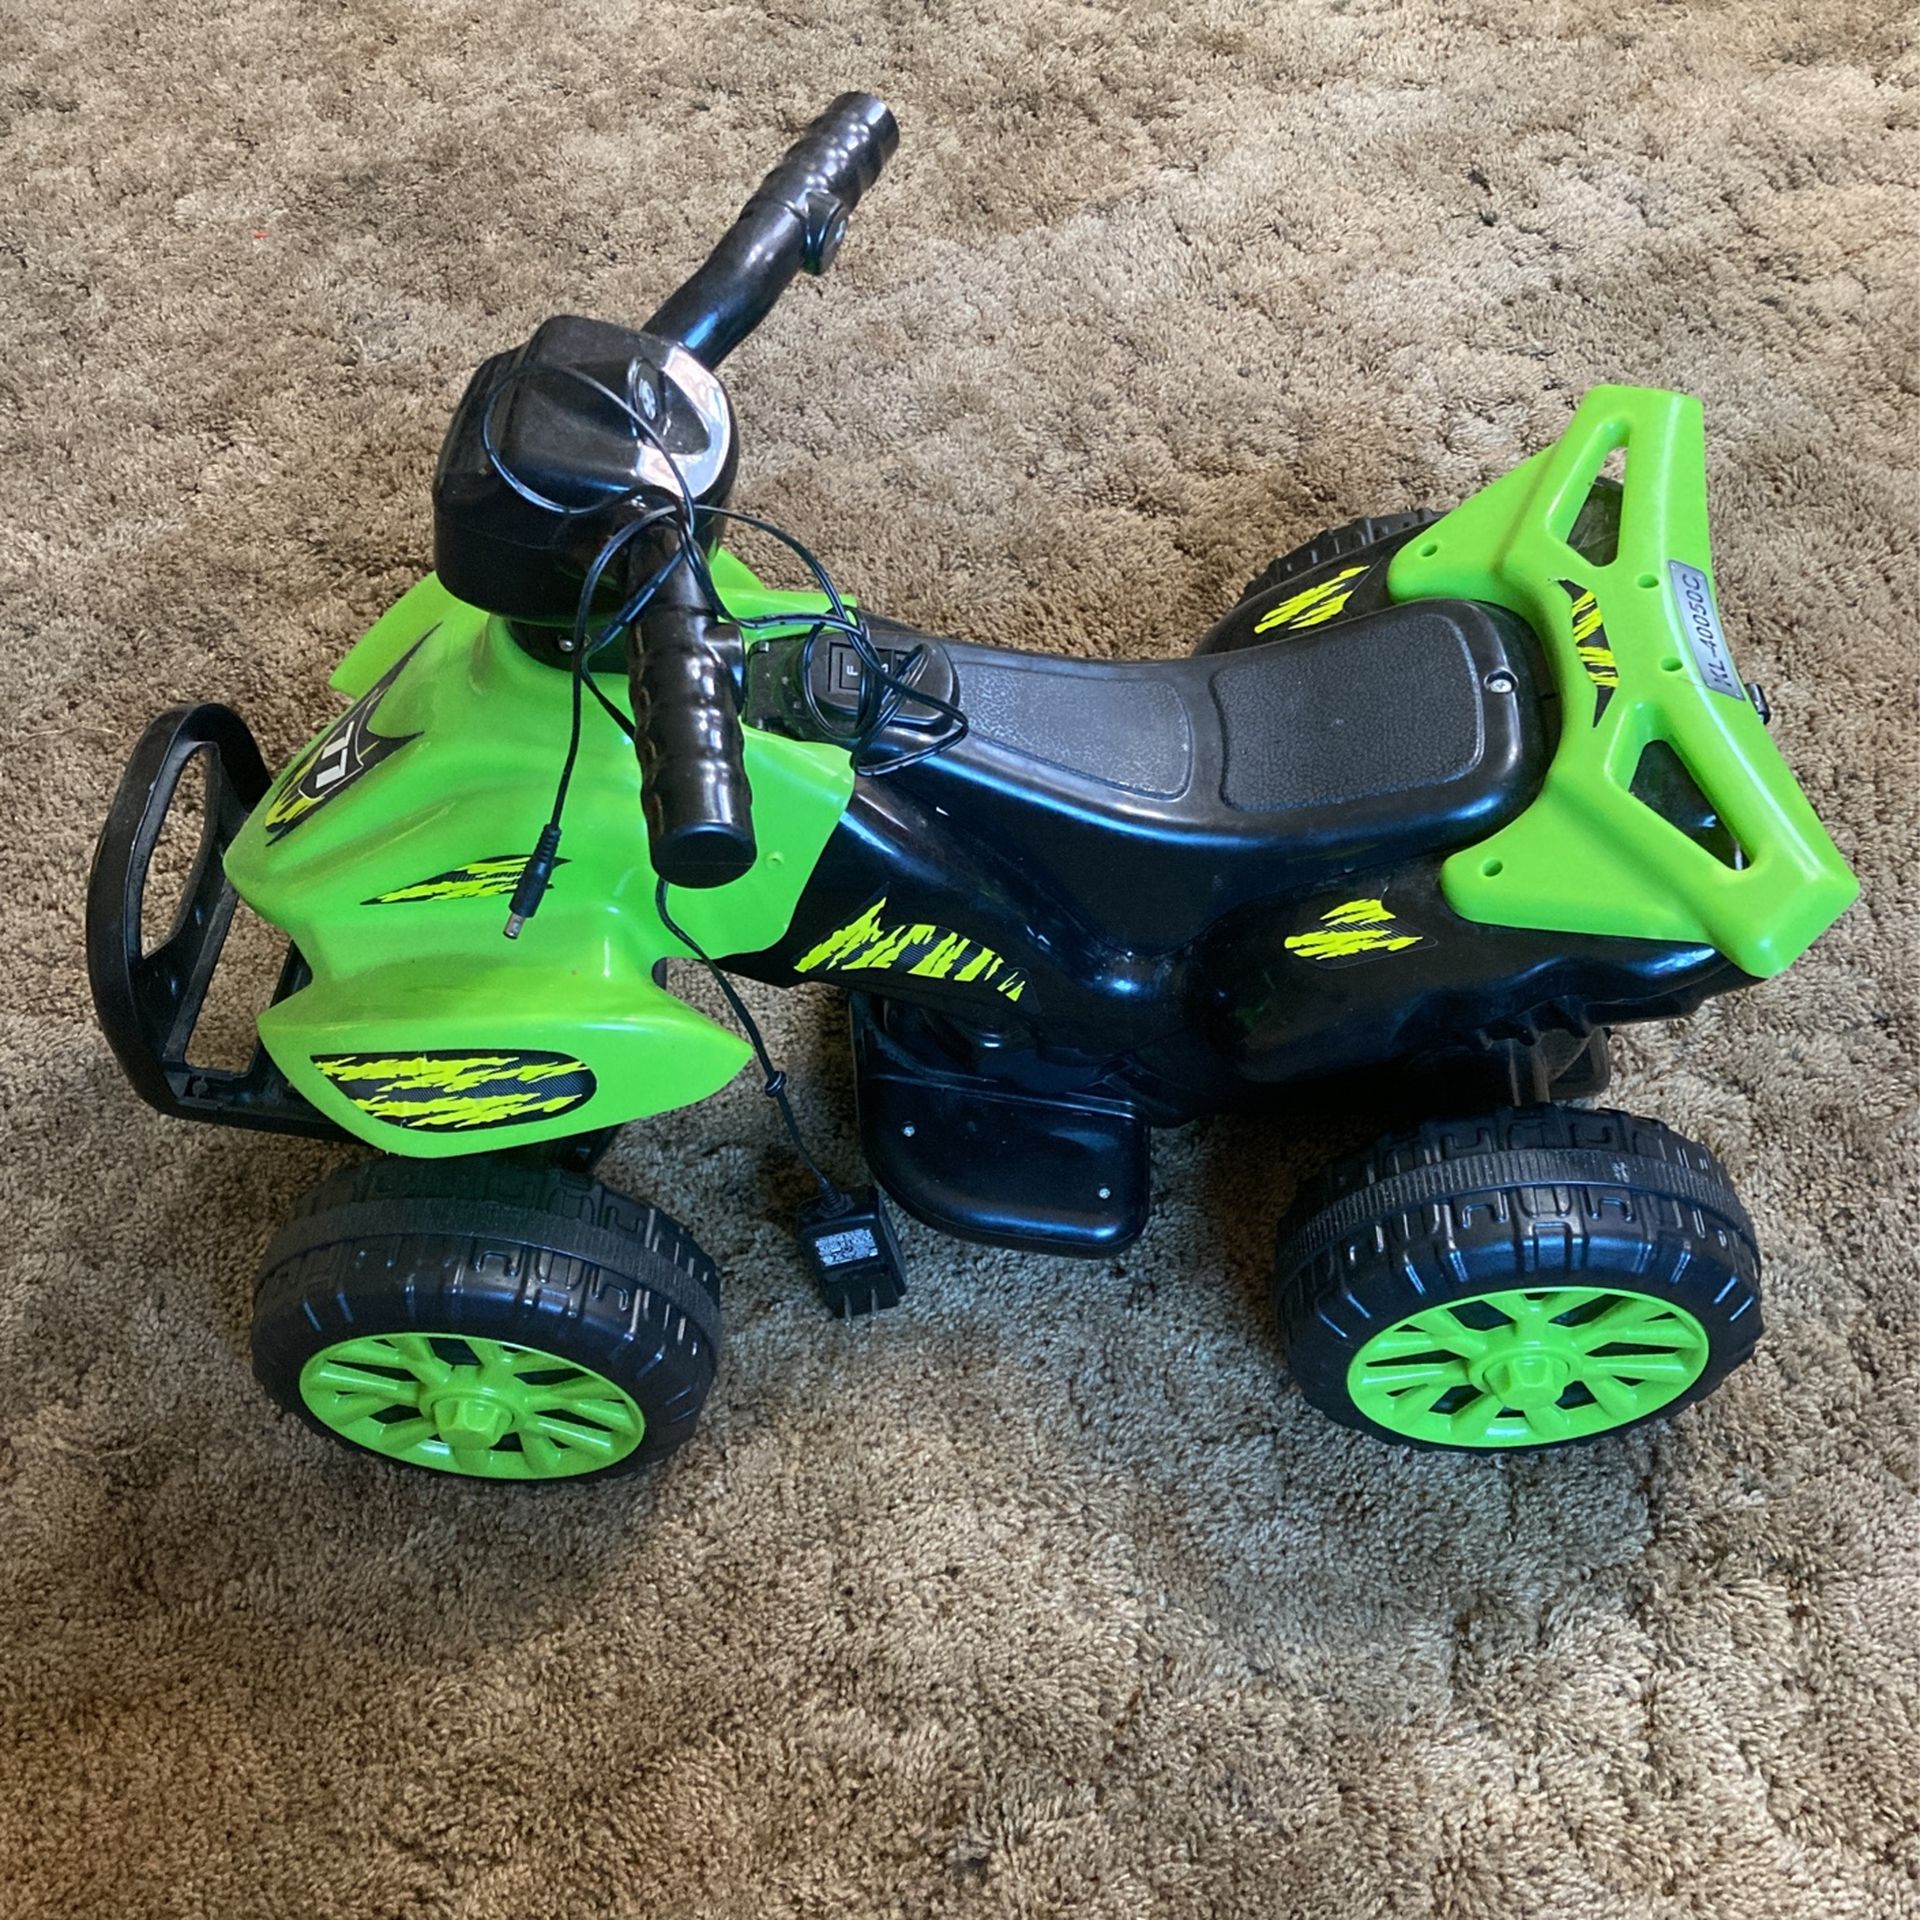 ATV  Kids Toy Bike With Charger 